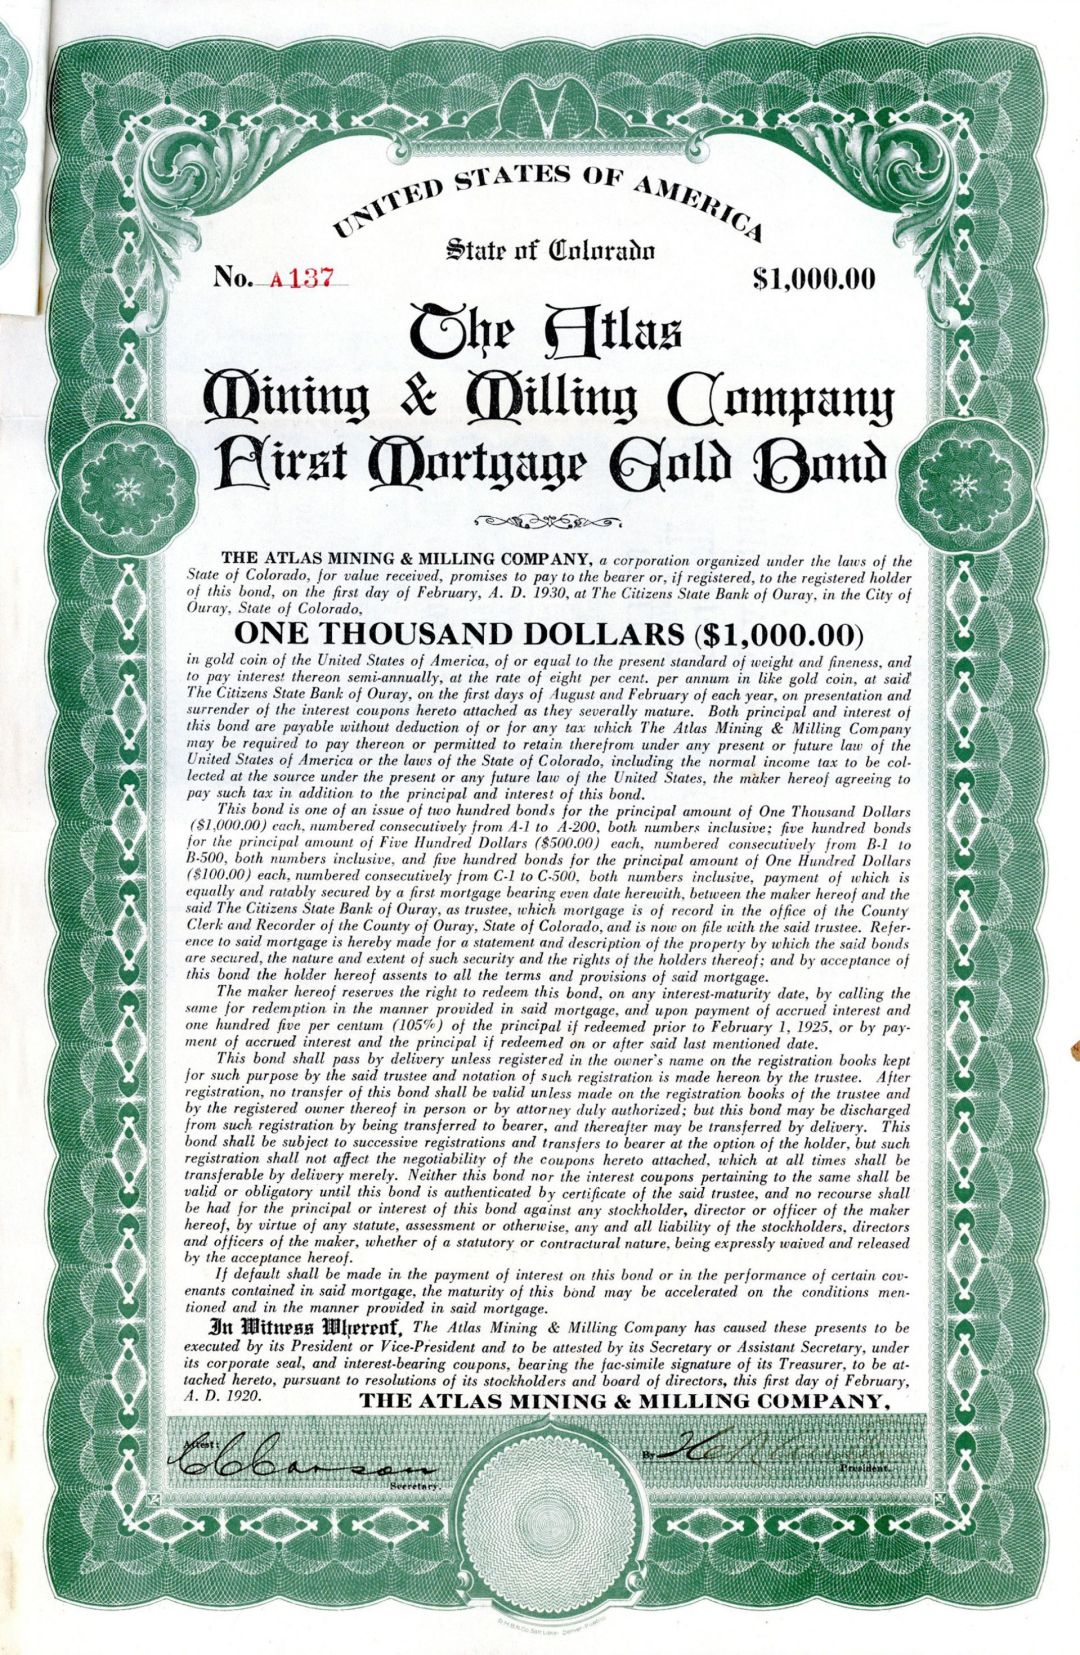 Atlas Mining and Milling Co. - $1,000 Gold Bond (Uncanceled) dated 1920